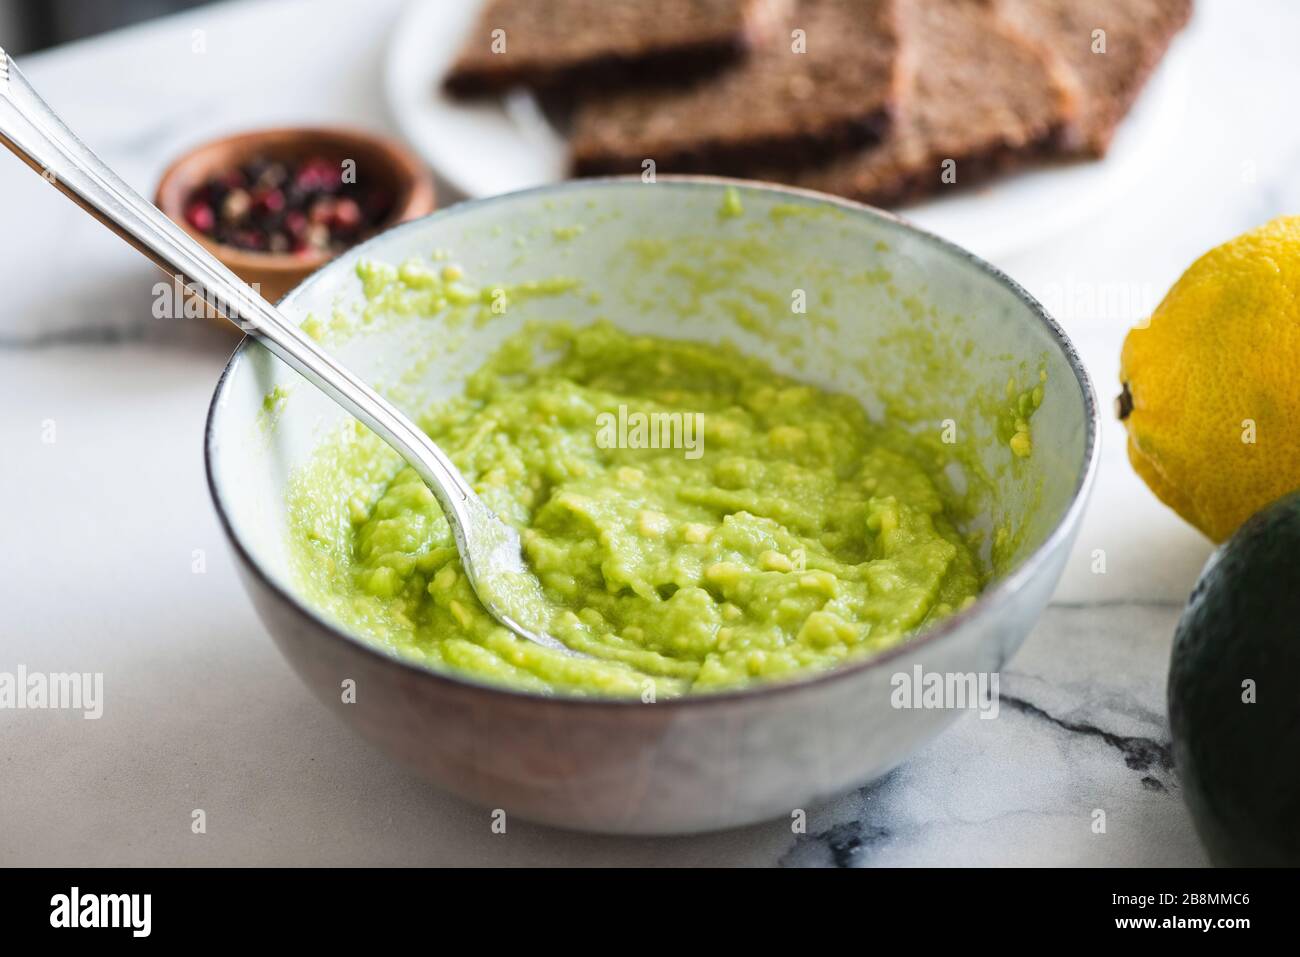 Mashed avocado sauce in bowl. Guacamole sauce, healthy vegan and vegetarian snack sauce Stock Photo